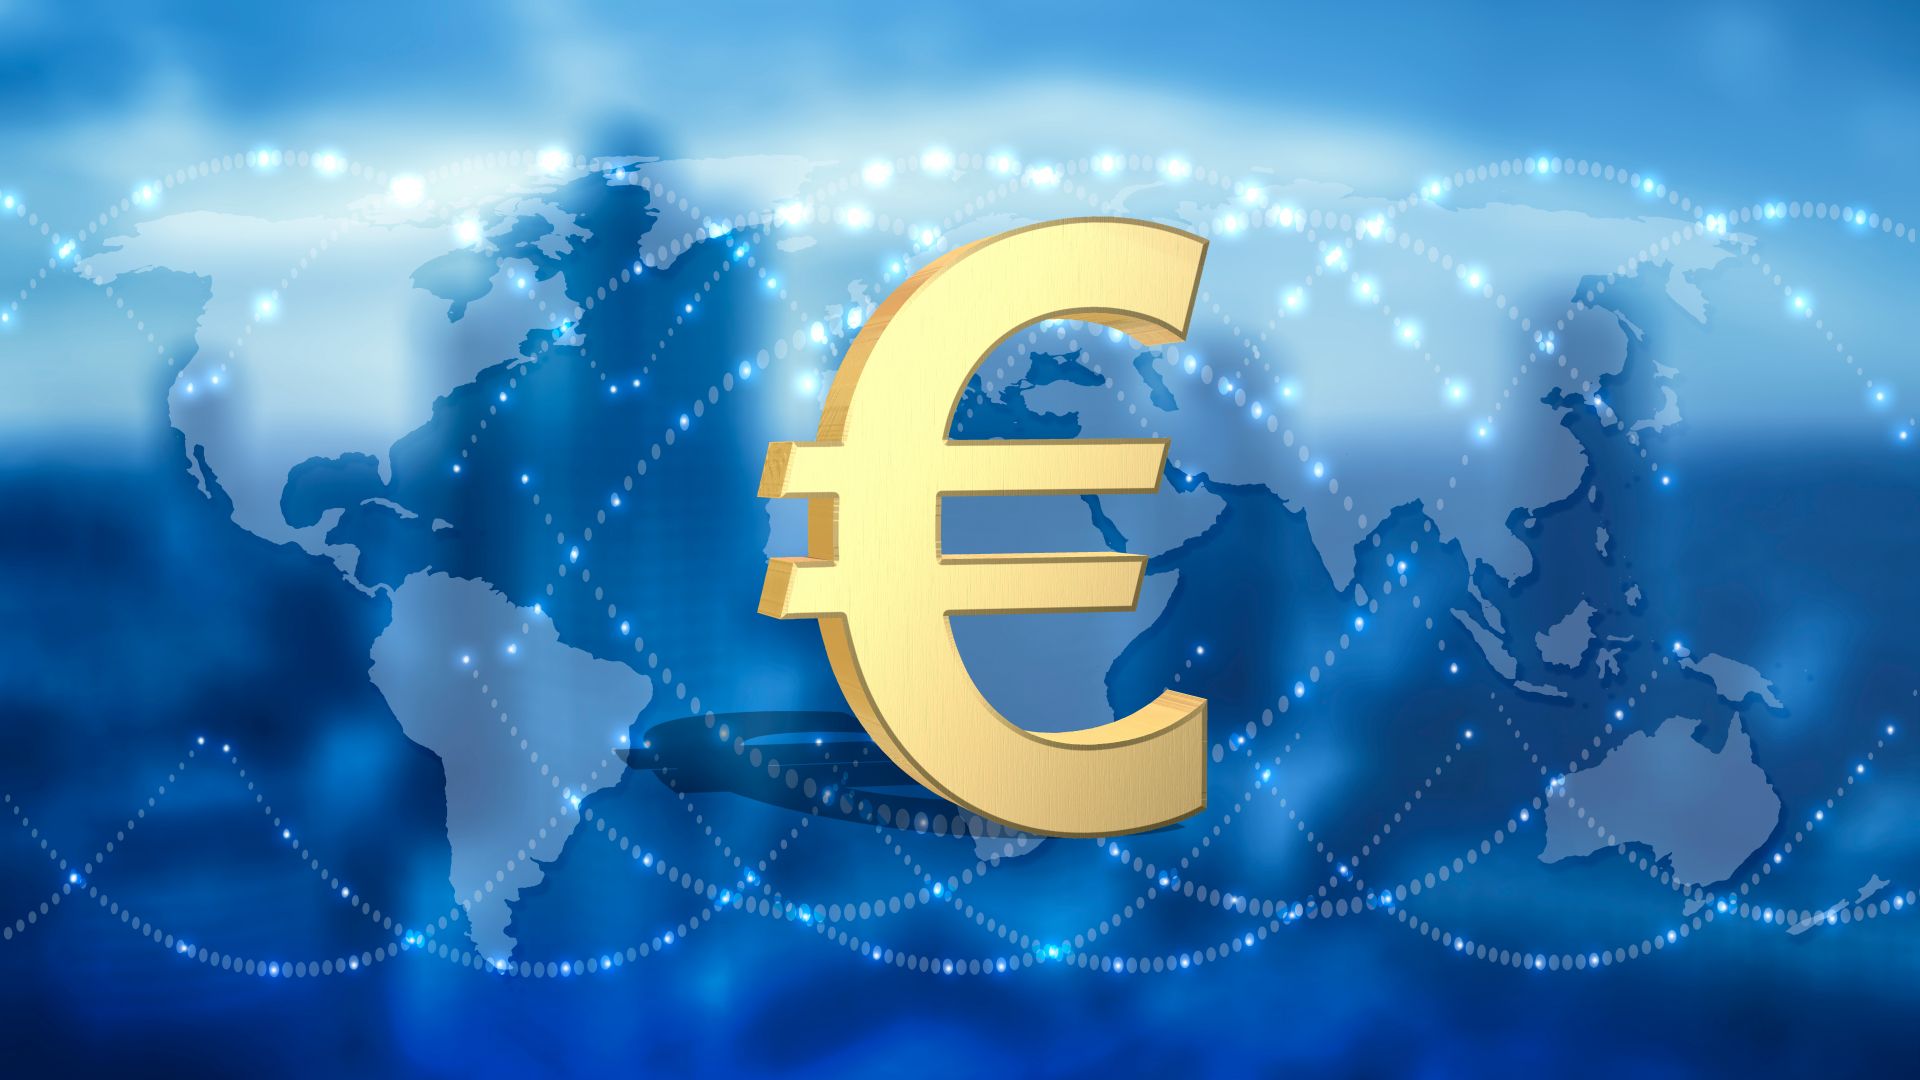 euro sign over blue banner of globe world countries